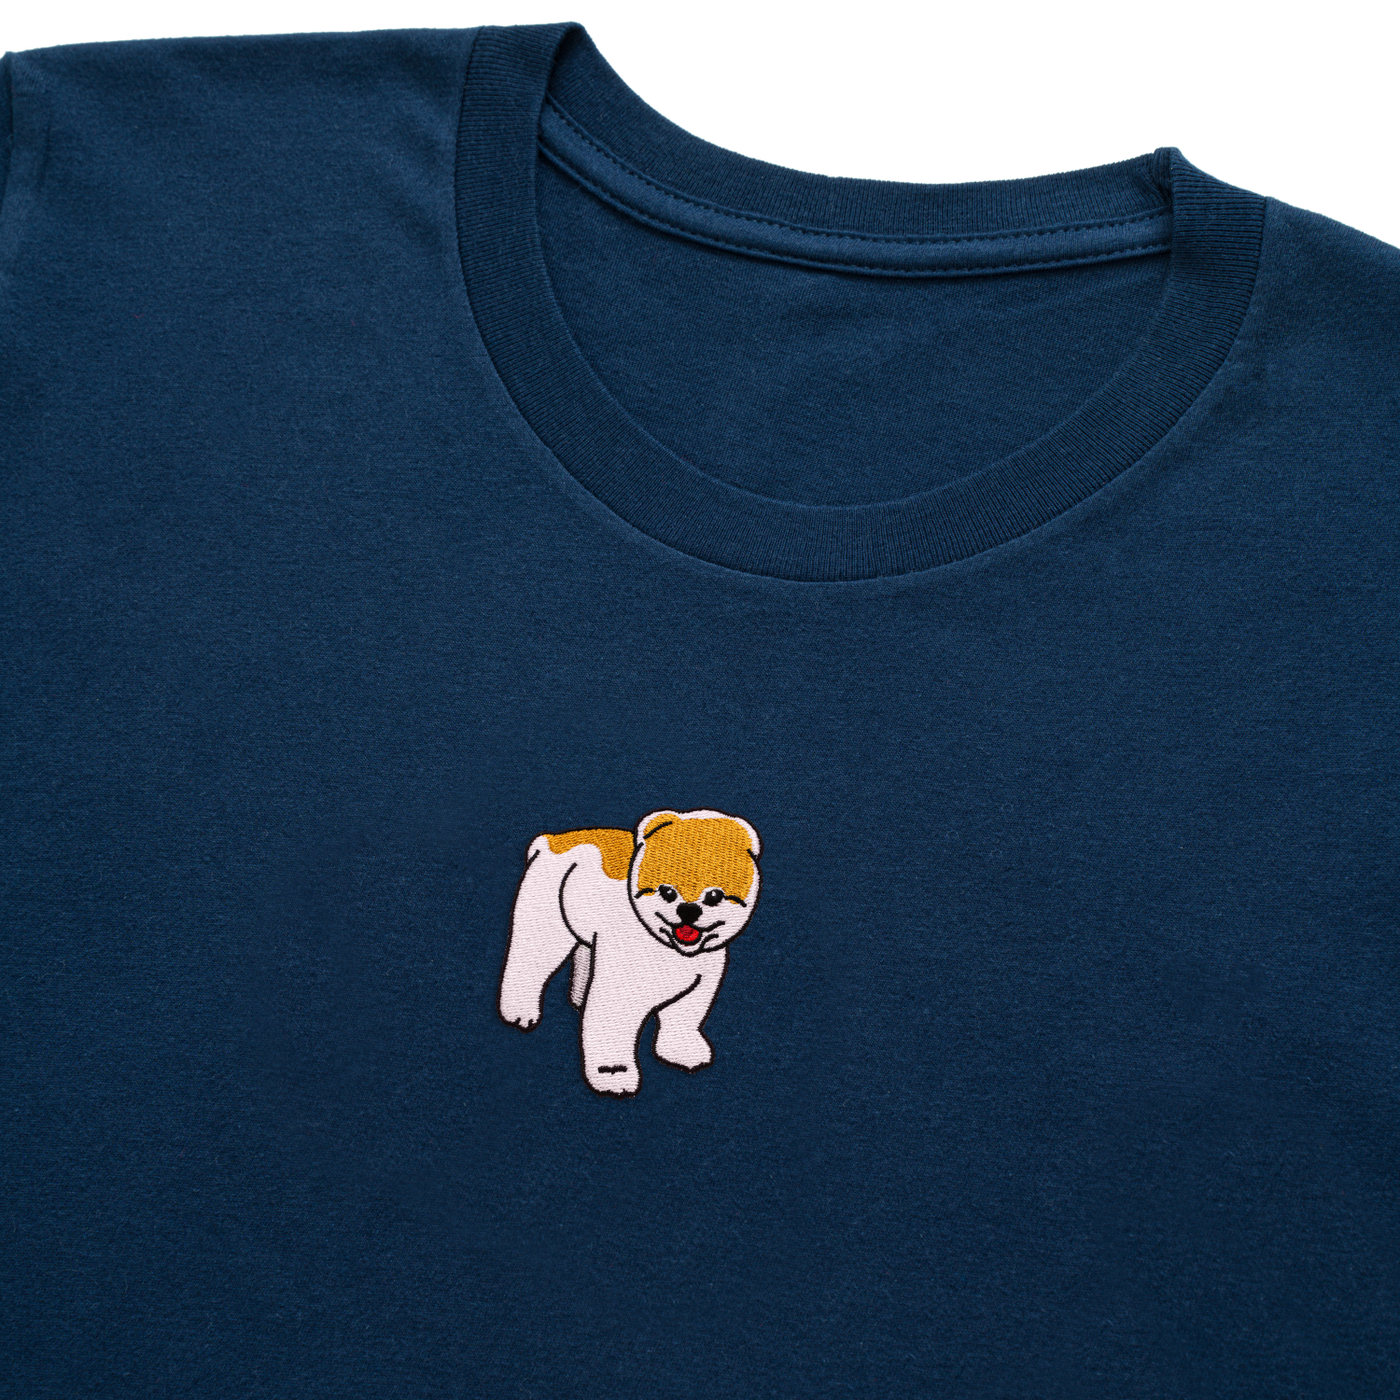 Bobby's Planet Men's Embroidered Pomeranian T-Shirt from Paws Dog Cat Animals Collection in Navy Color#color_navy